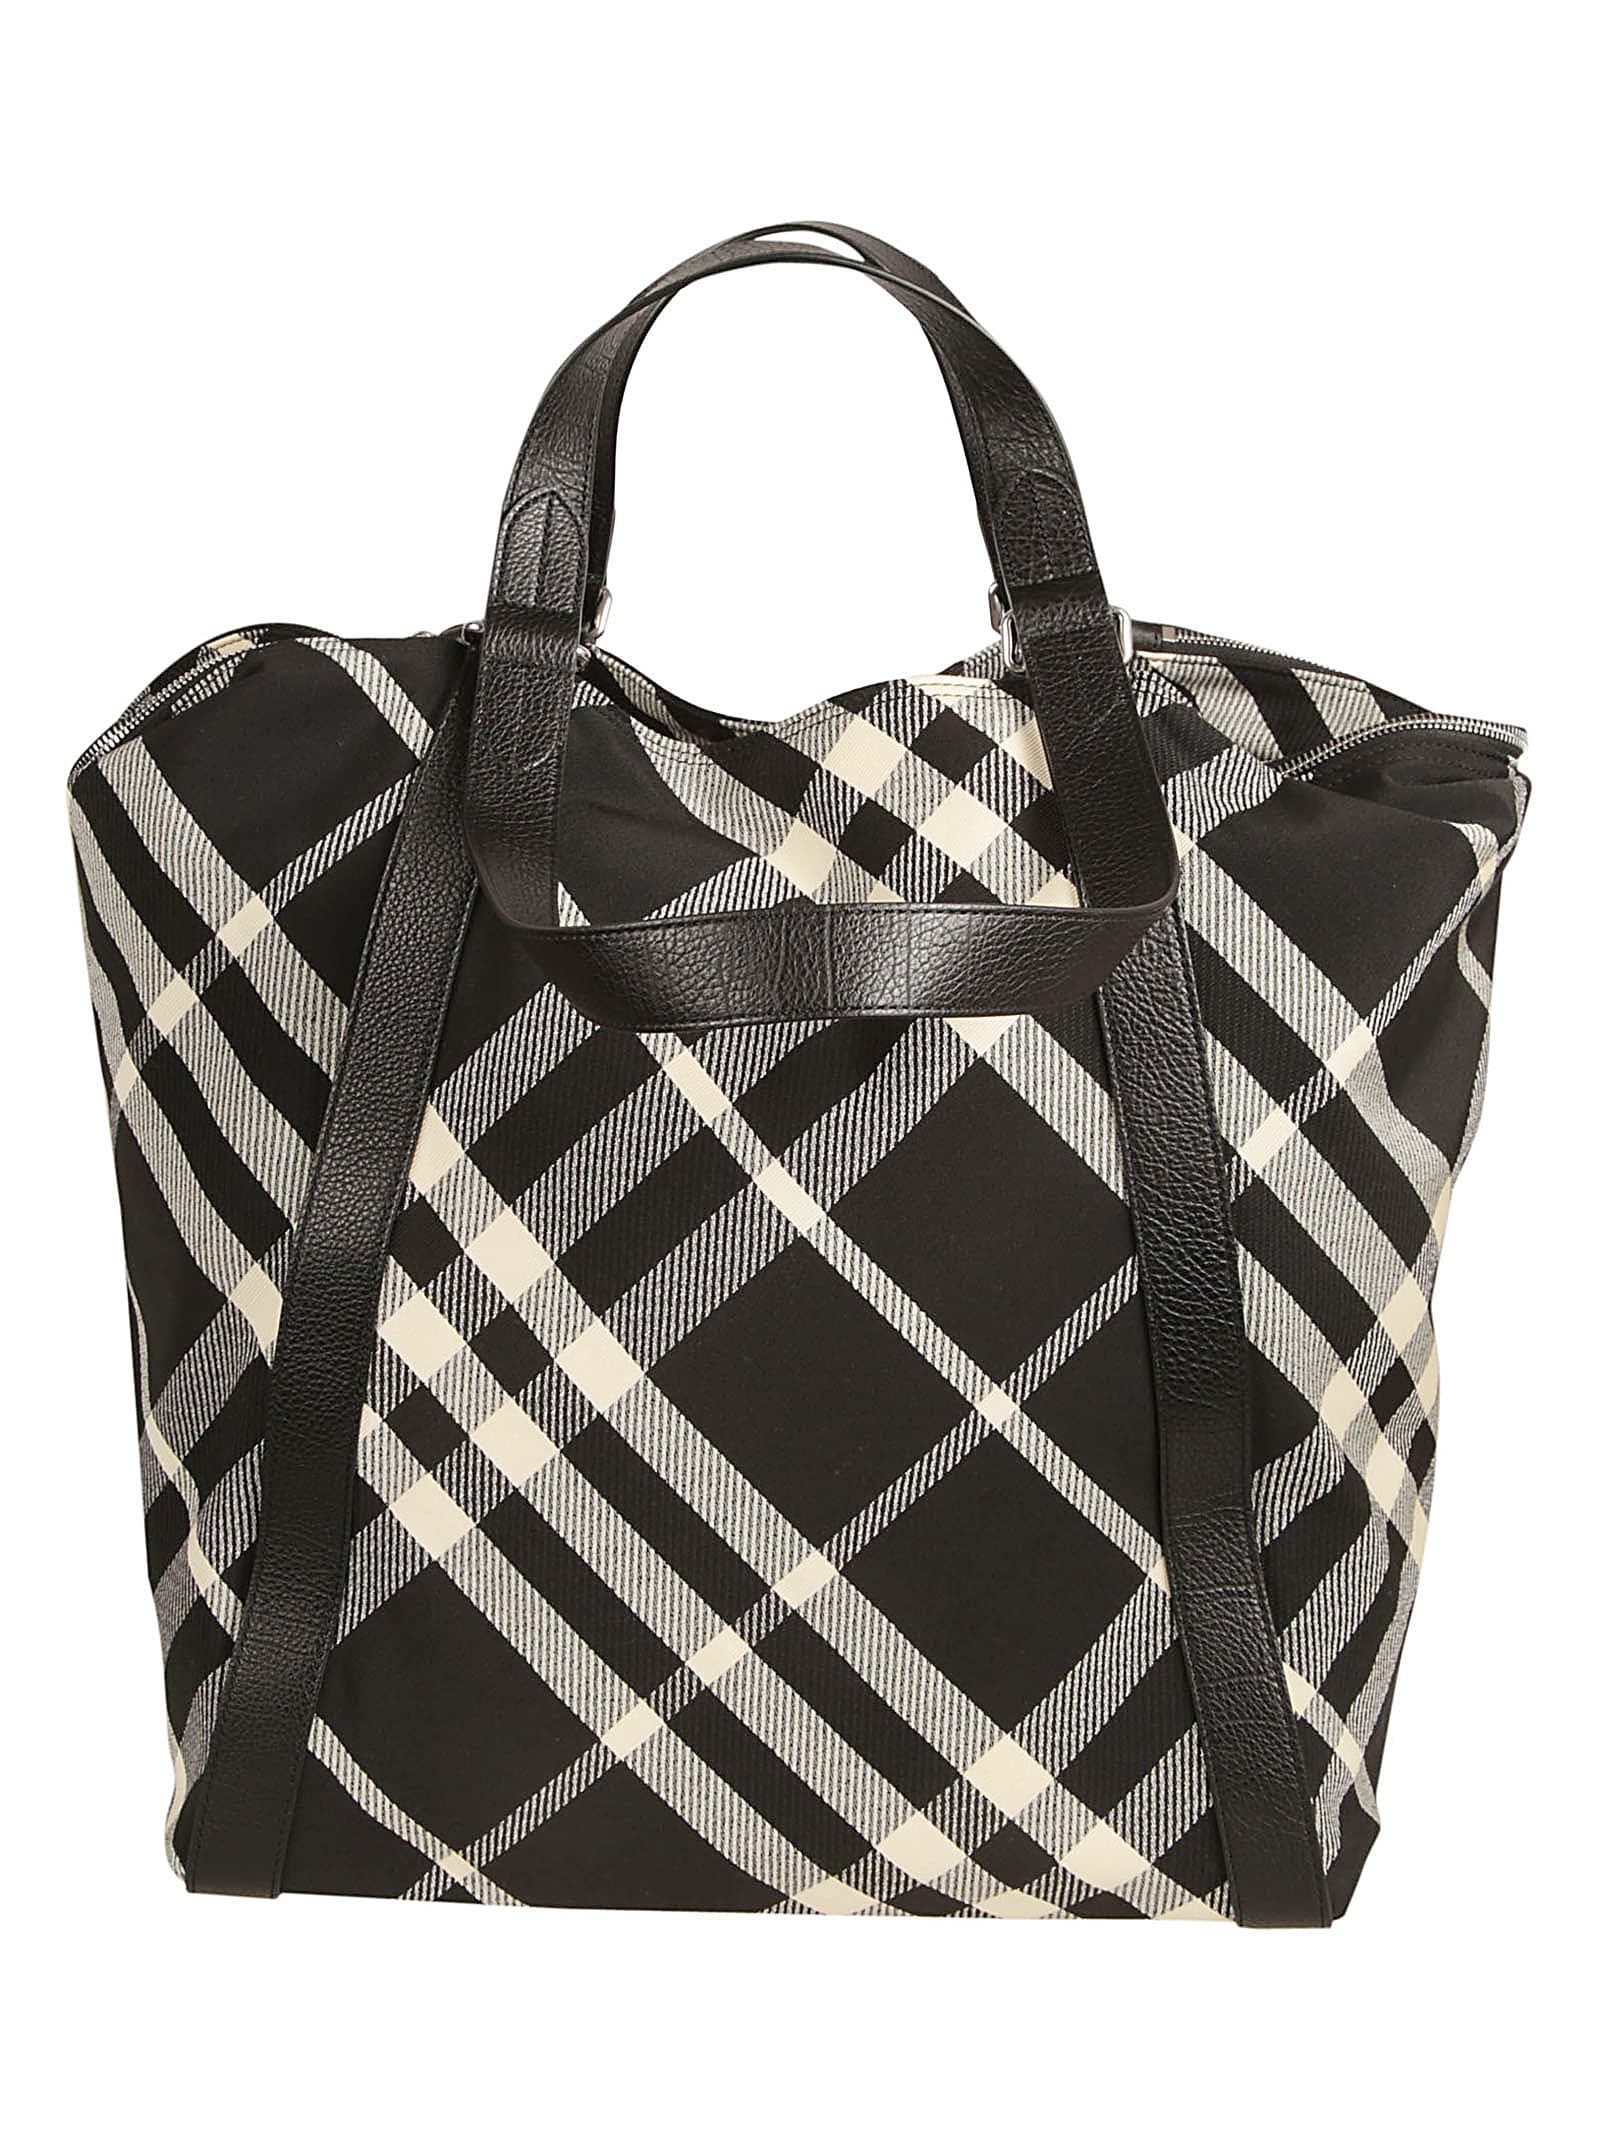 Shop Burberry Check Patterned Tote In Black/calico